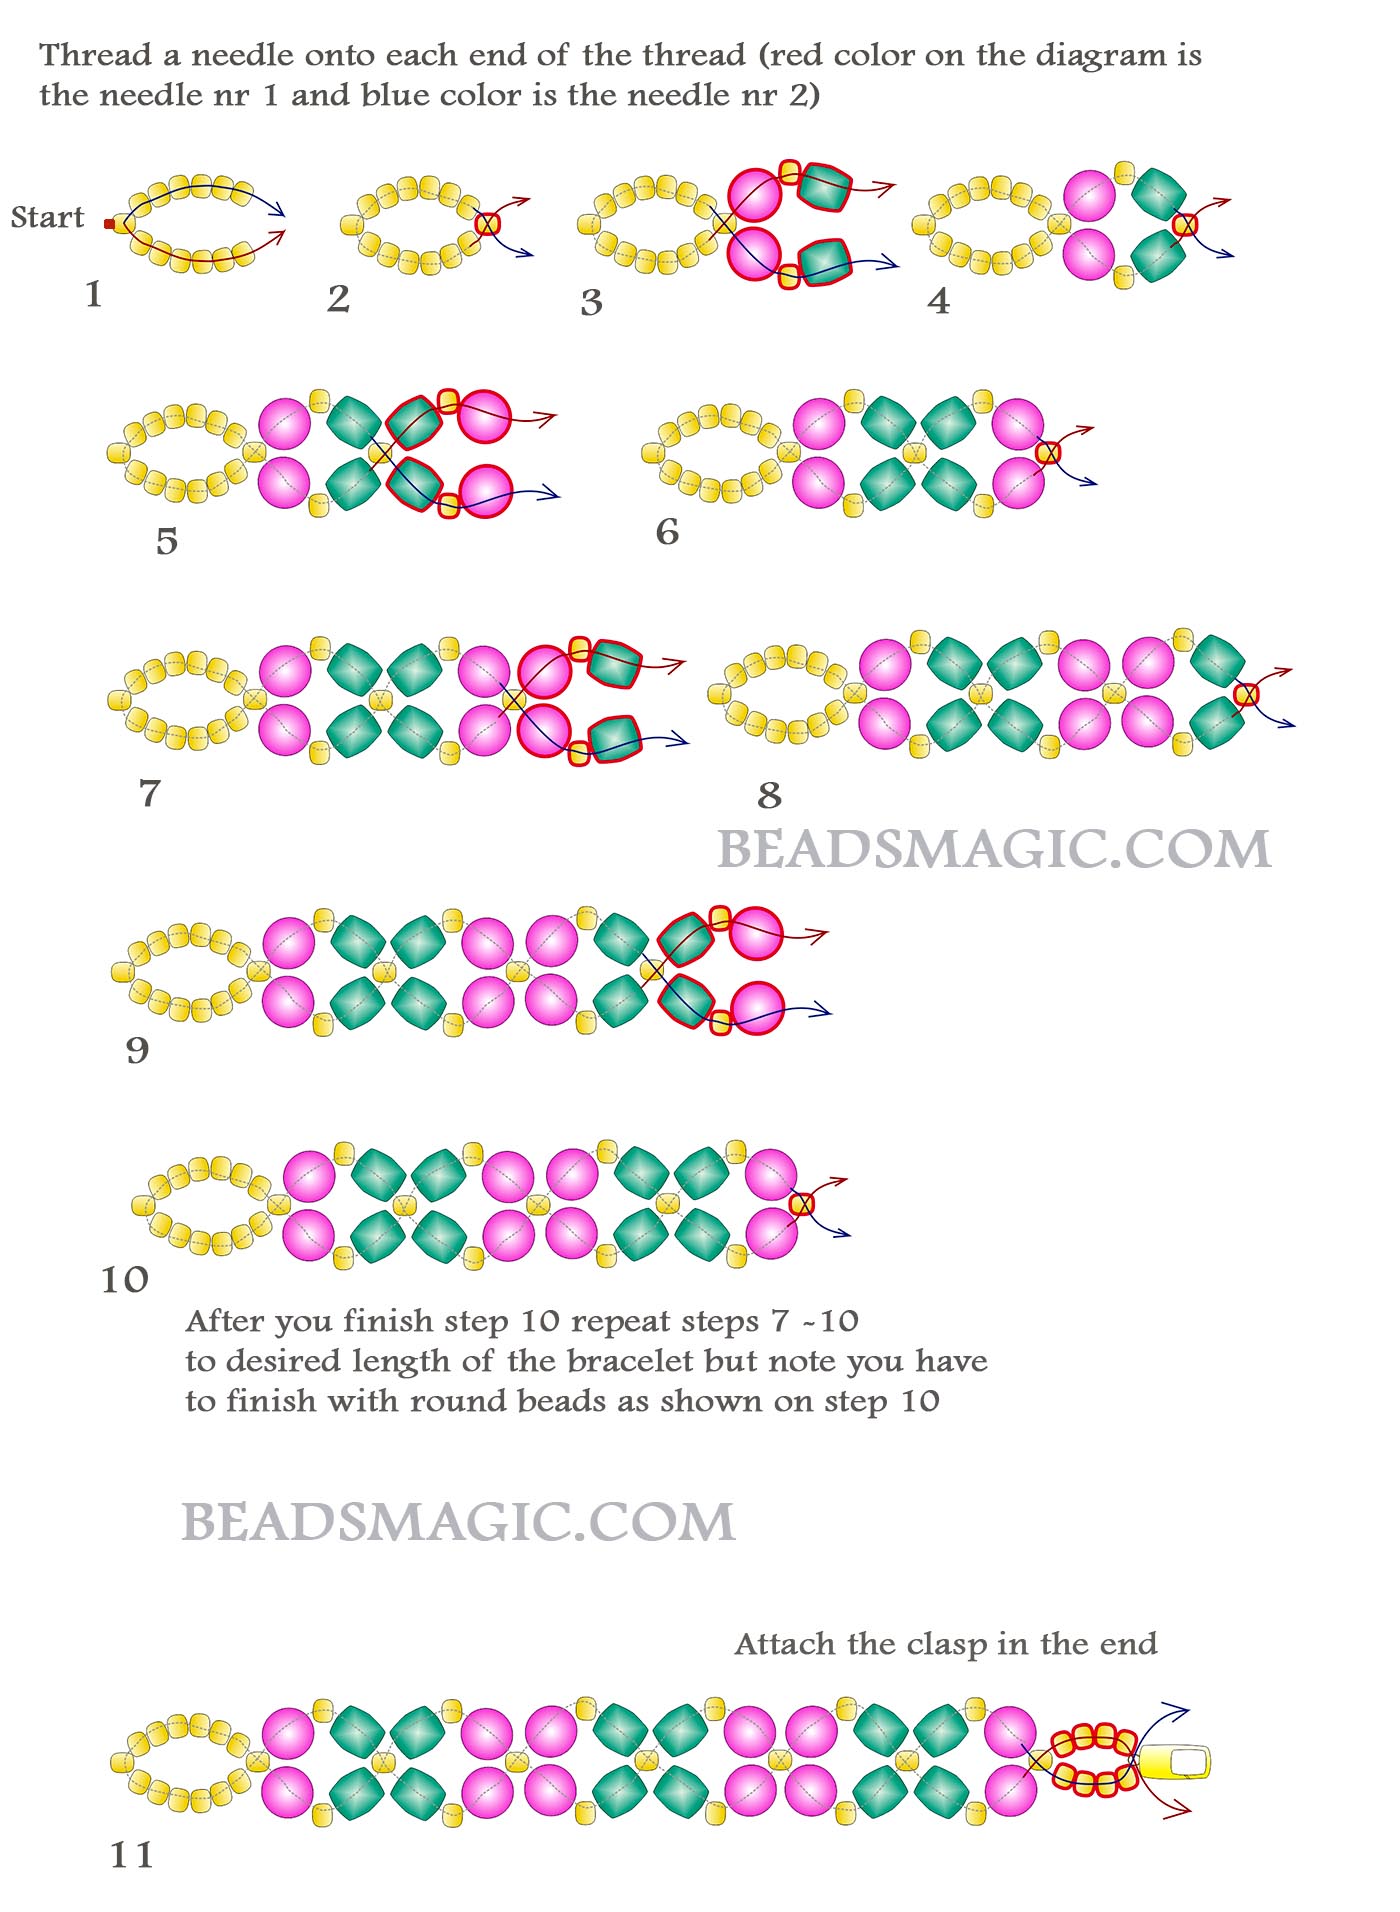 DIY jewelry, free beading tutorial, beaded bracelet, free pattern for beaded bracelet, superduo beads, fire polished beads, seed beads, step-by-step bead instructions, experienced beader, free beading pattern, beaded bracelet project, beading pattern, bead instructions